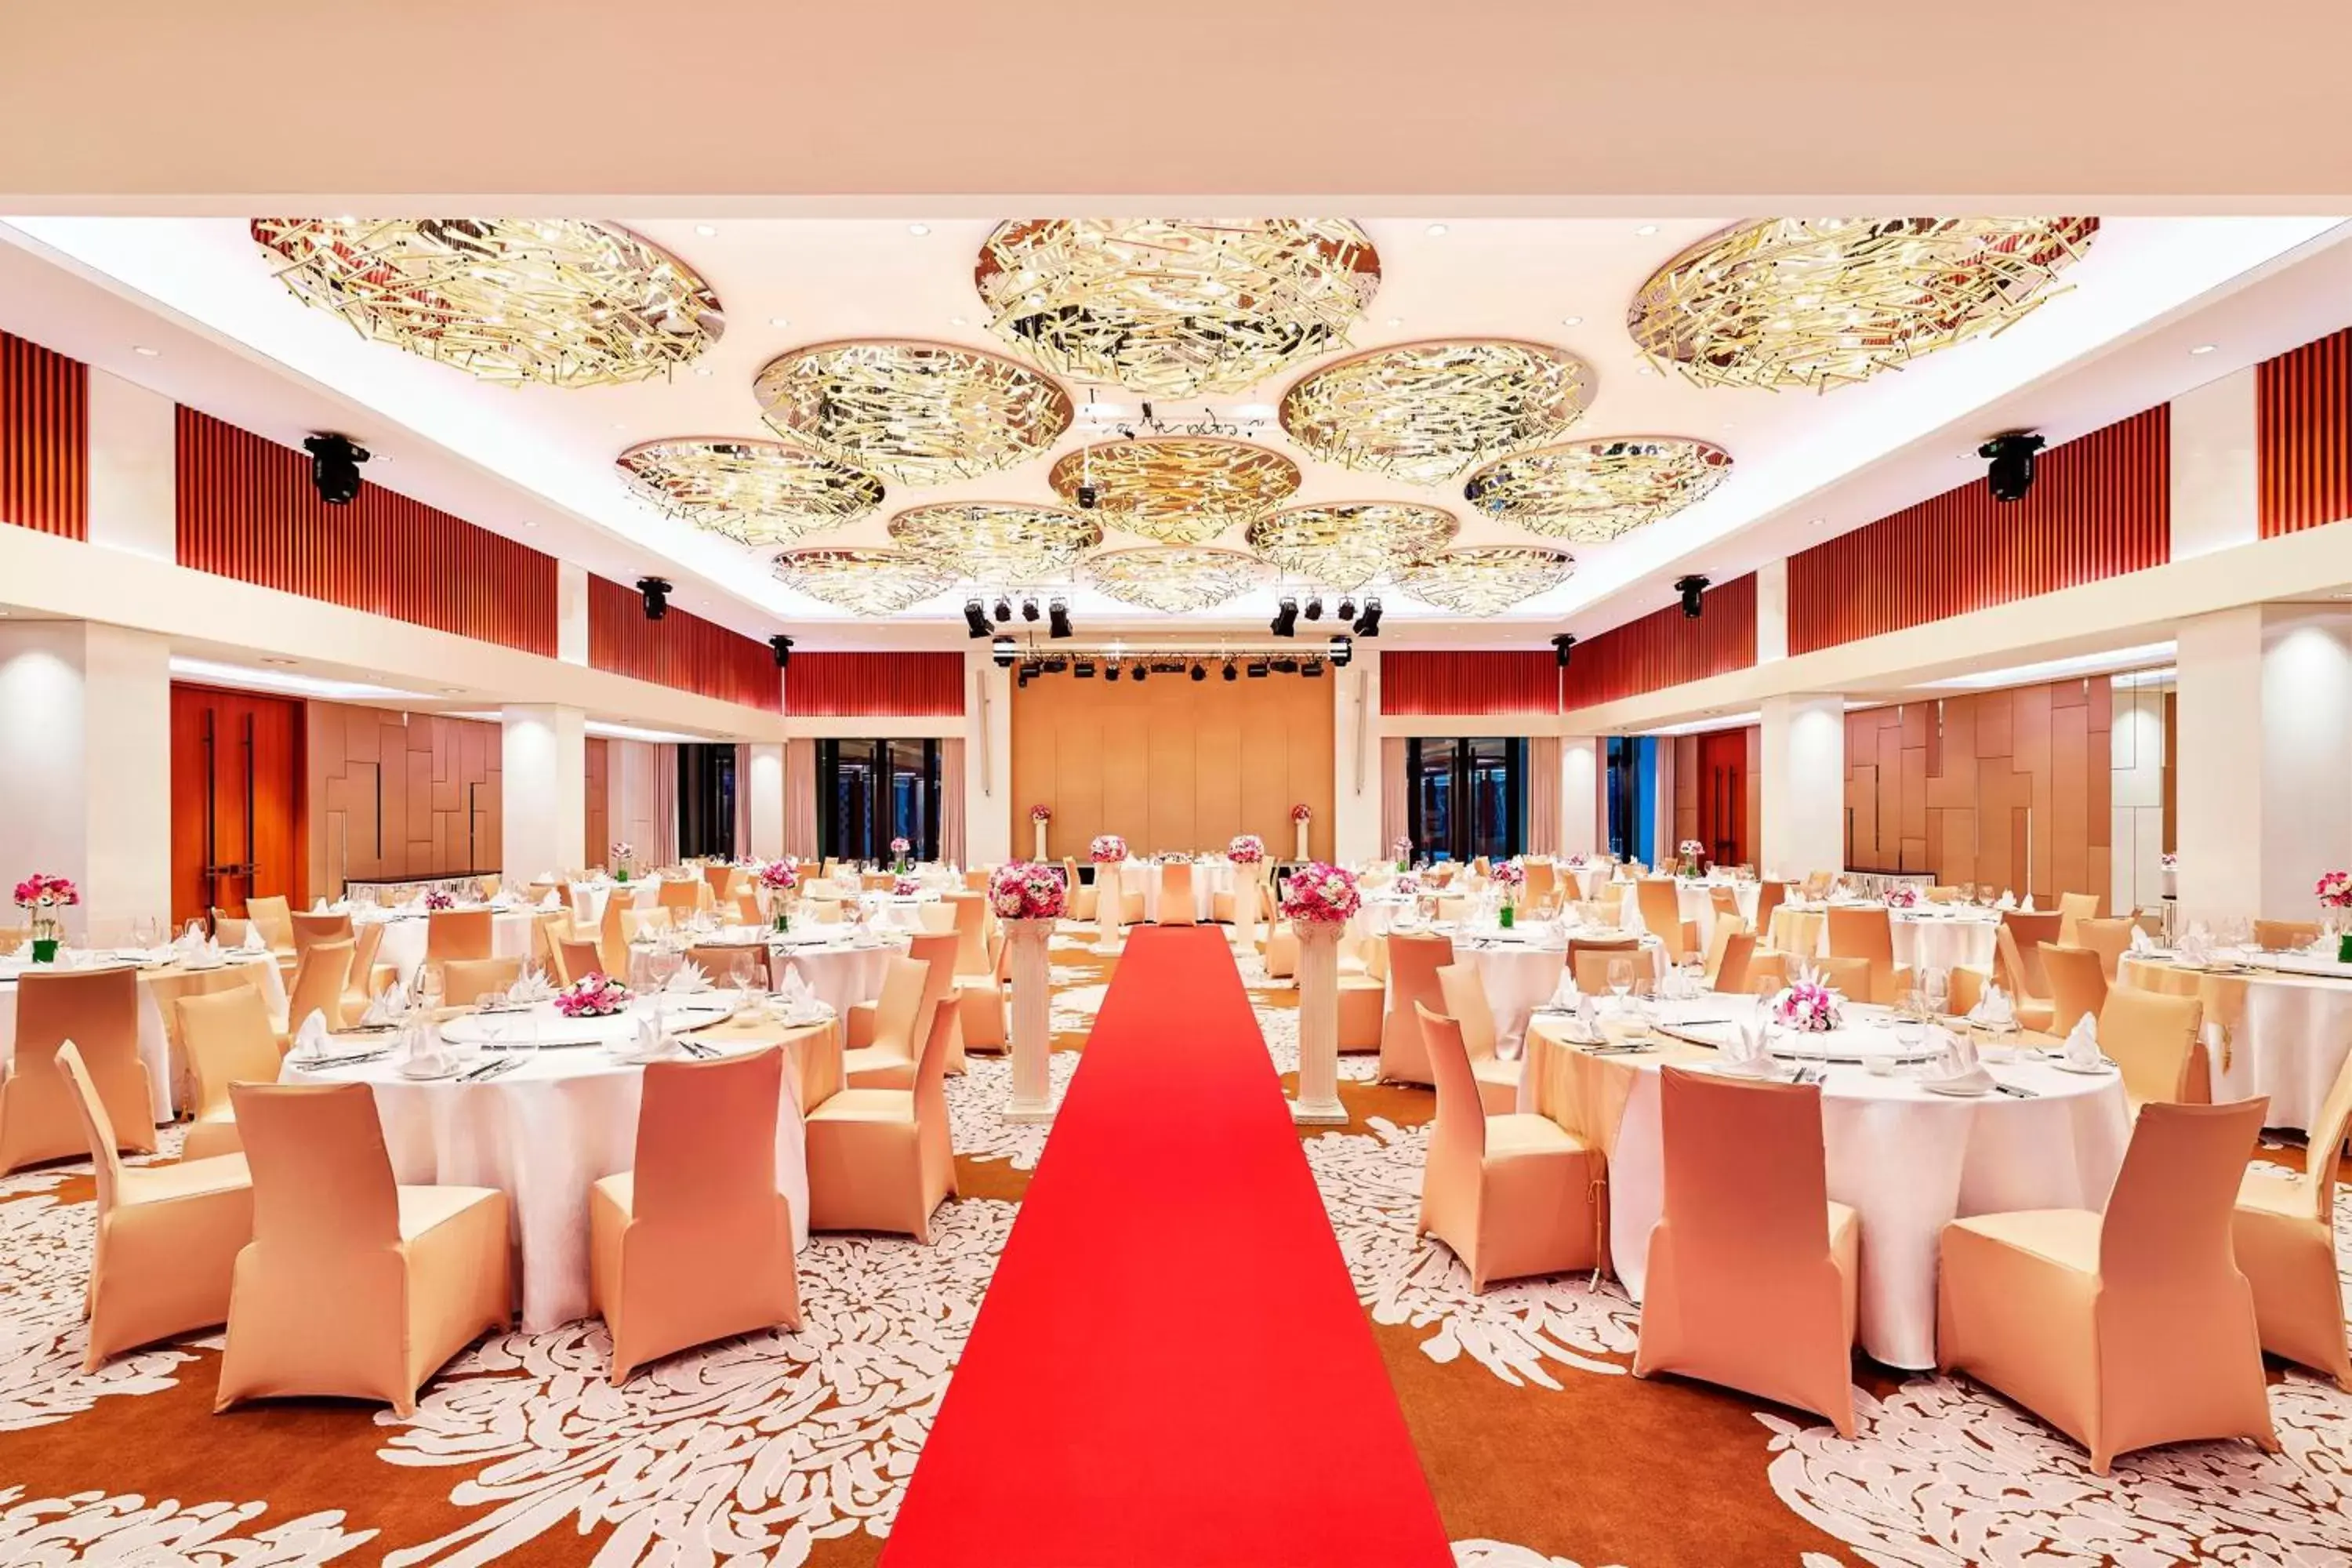 Meeting/conference room, Banquet Facilities in The Westin Tashee Resort, Taoyuan